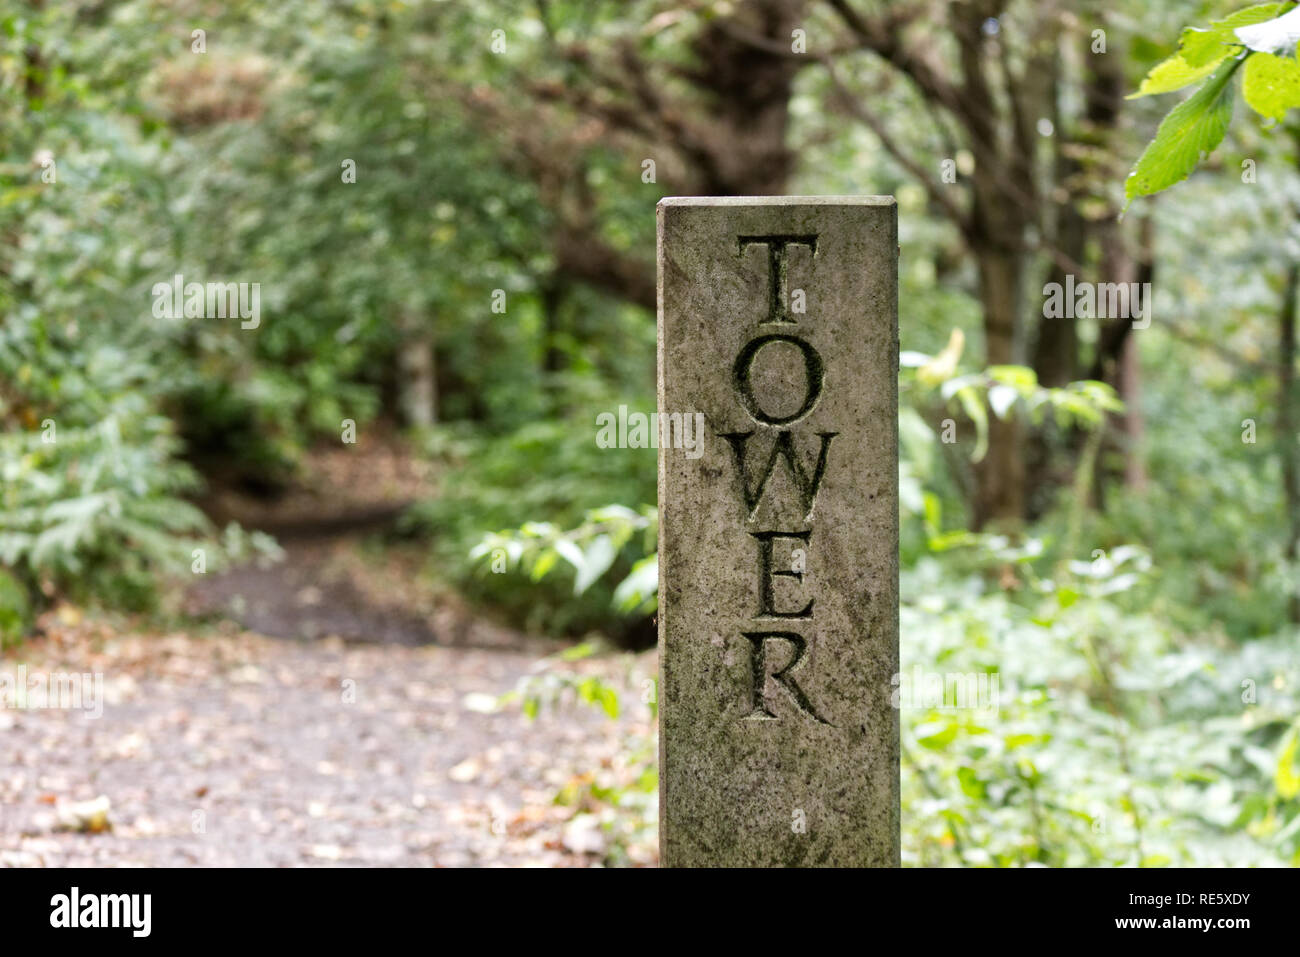 A stone pillar reading the word “tower” on a public forest path. Stock Photo